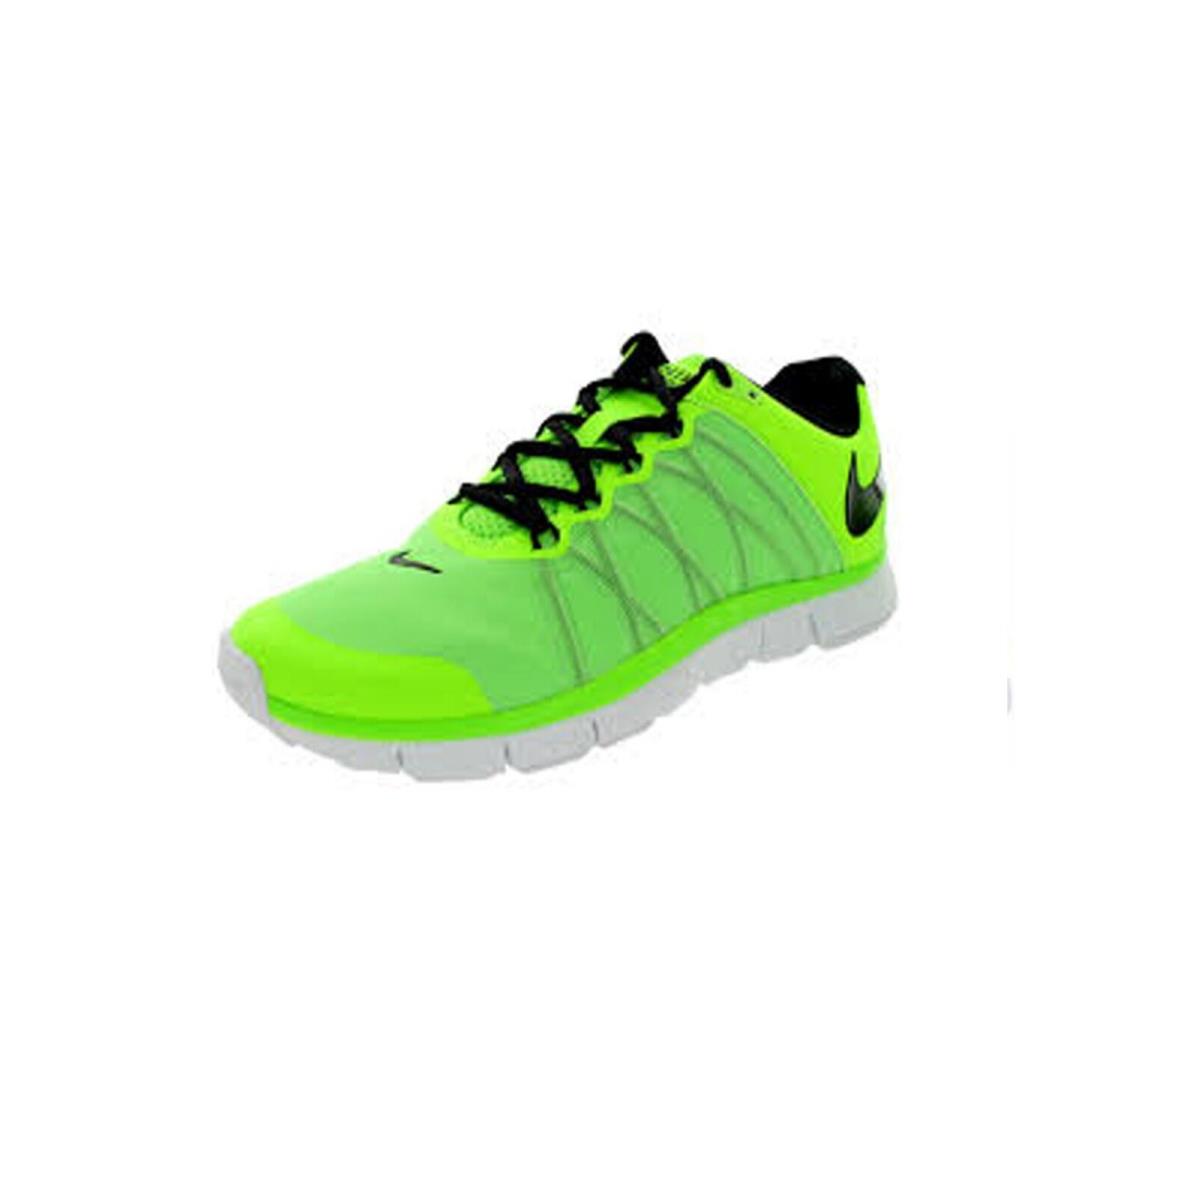 Nike Men`s Free Trainer 3.0 Shoes Electric Green 630856-301